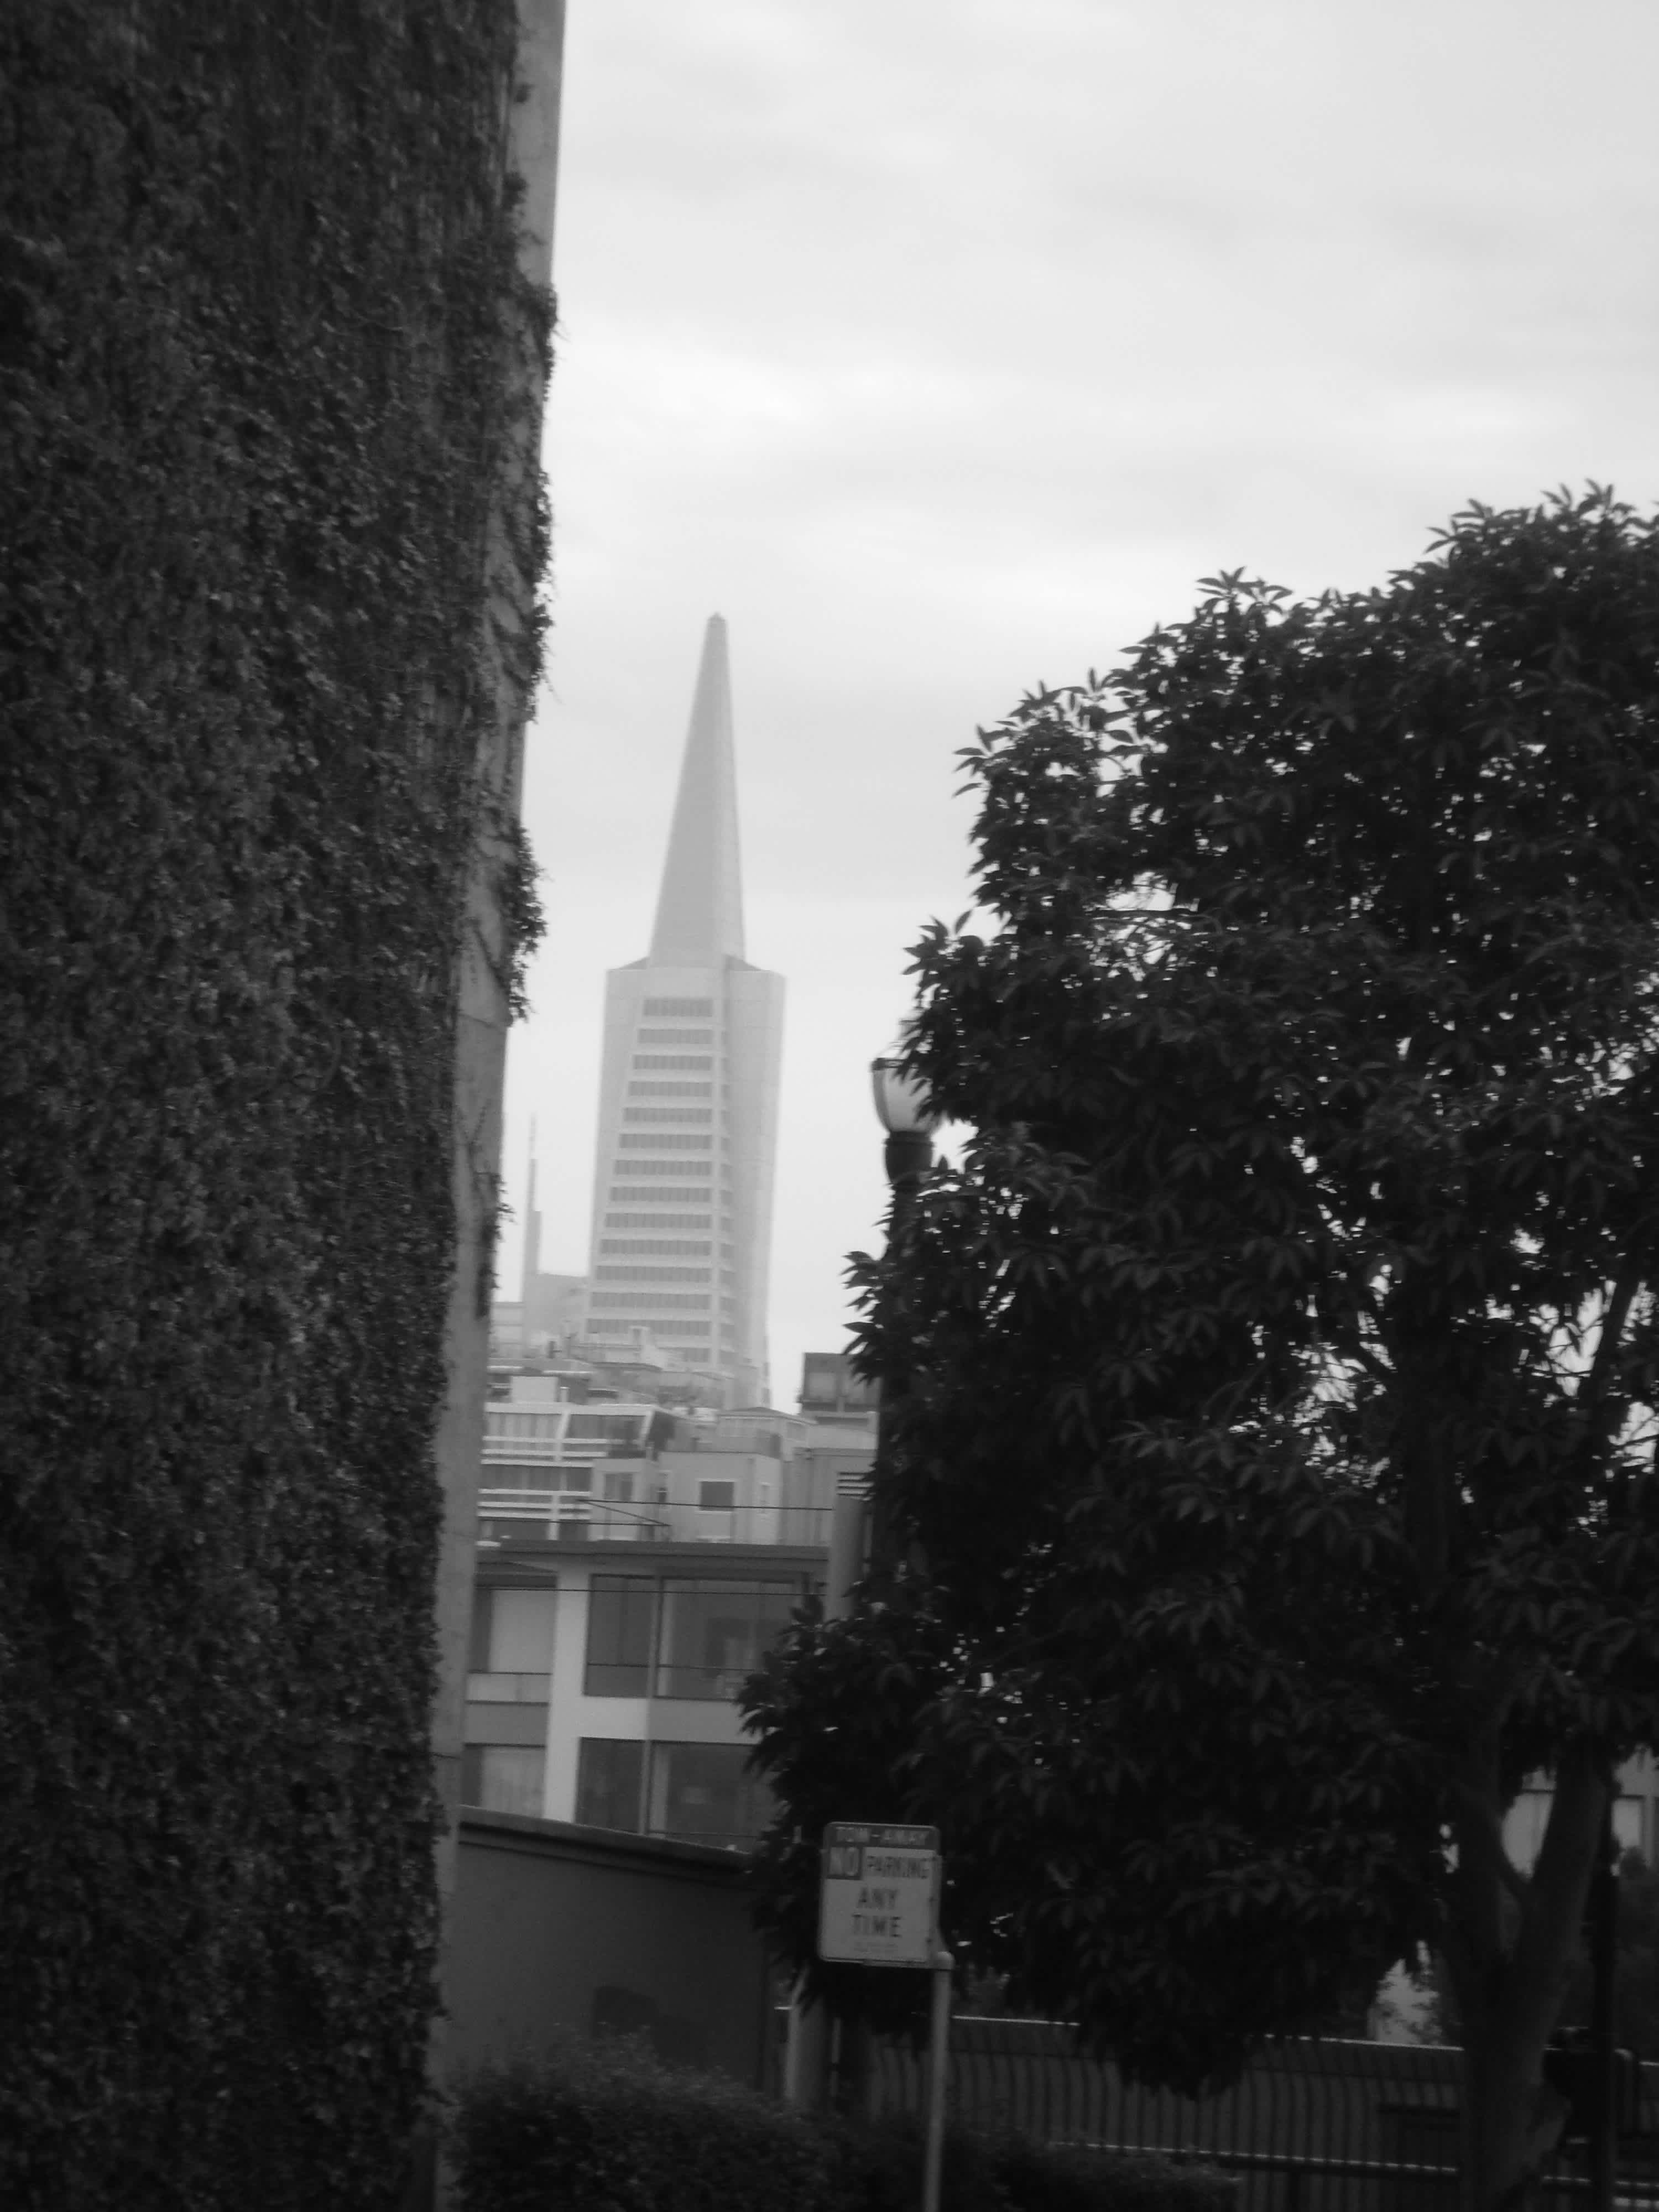 Black and white shot of the city with a tower in the background in Embarcadero, San Francisco, California.